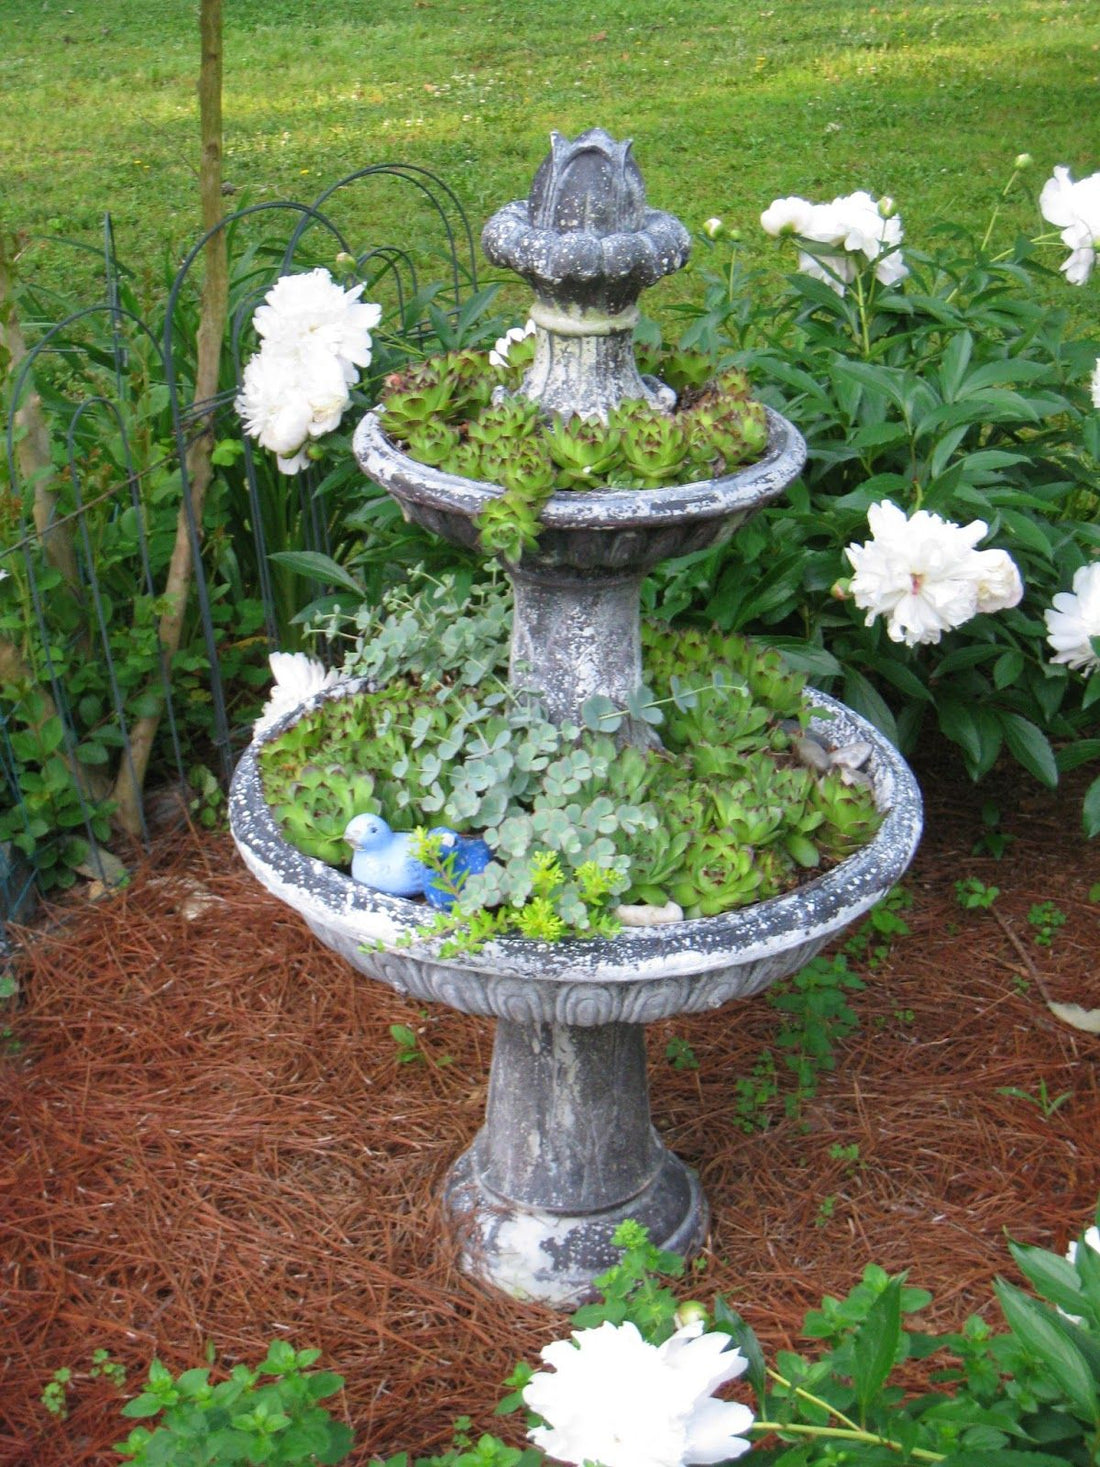 How To Change Old Bird Bath/Fountain Into Planter